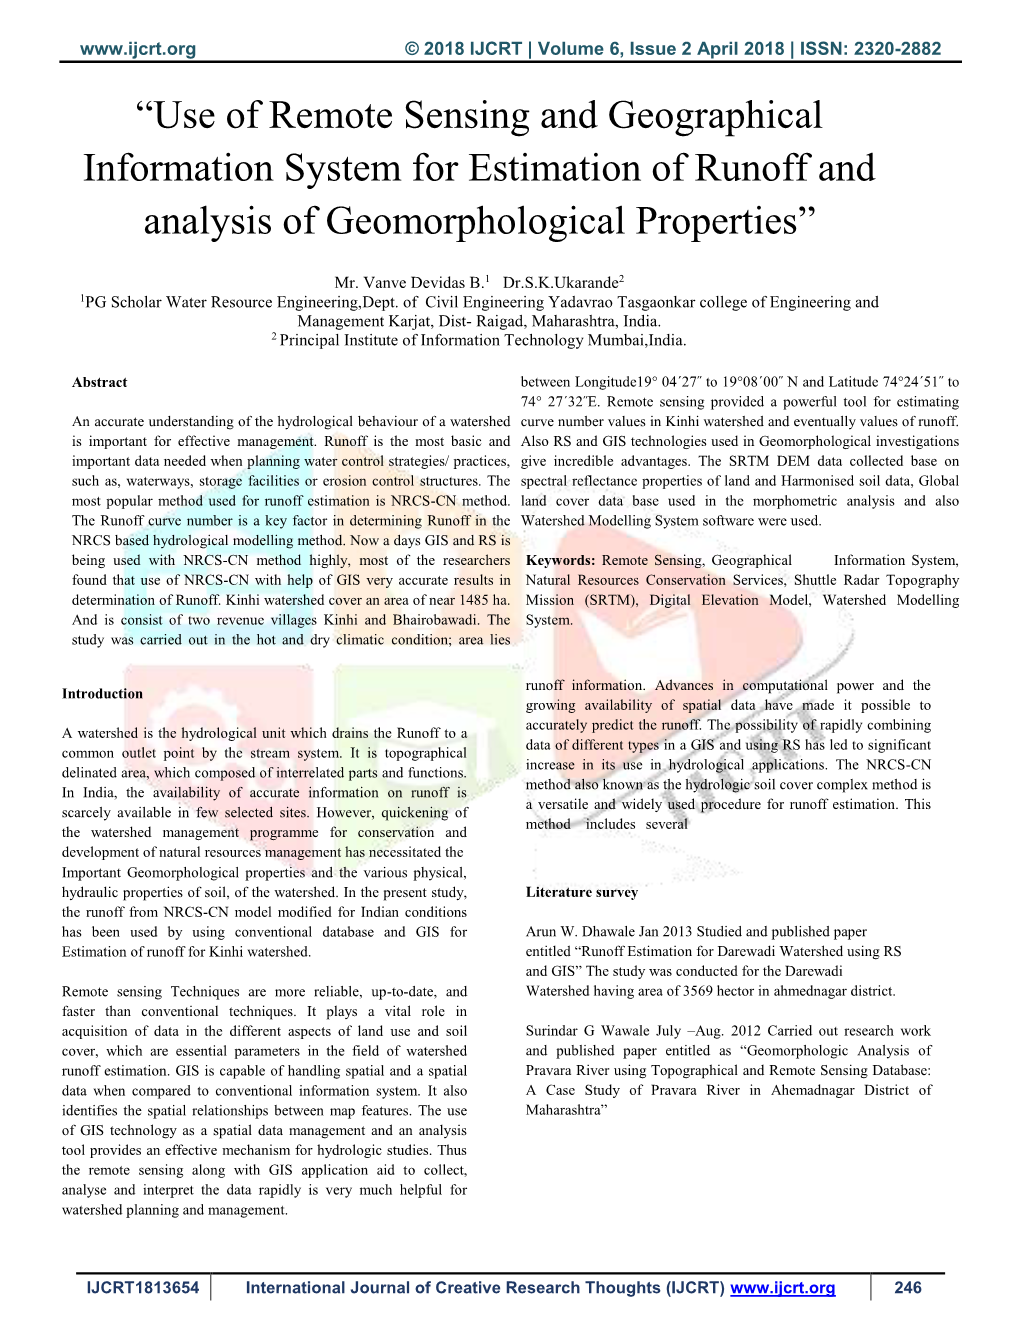 Use of Remote Sensing and Geographical Information System for Estimation of Runoff and Analysis of Geomorphological Properties”